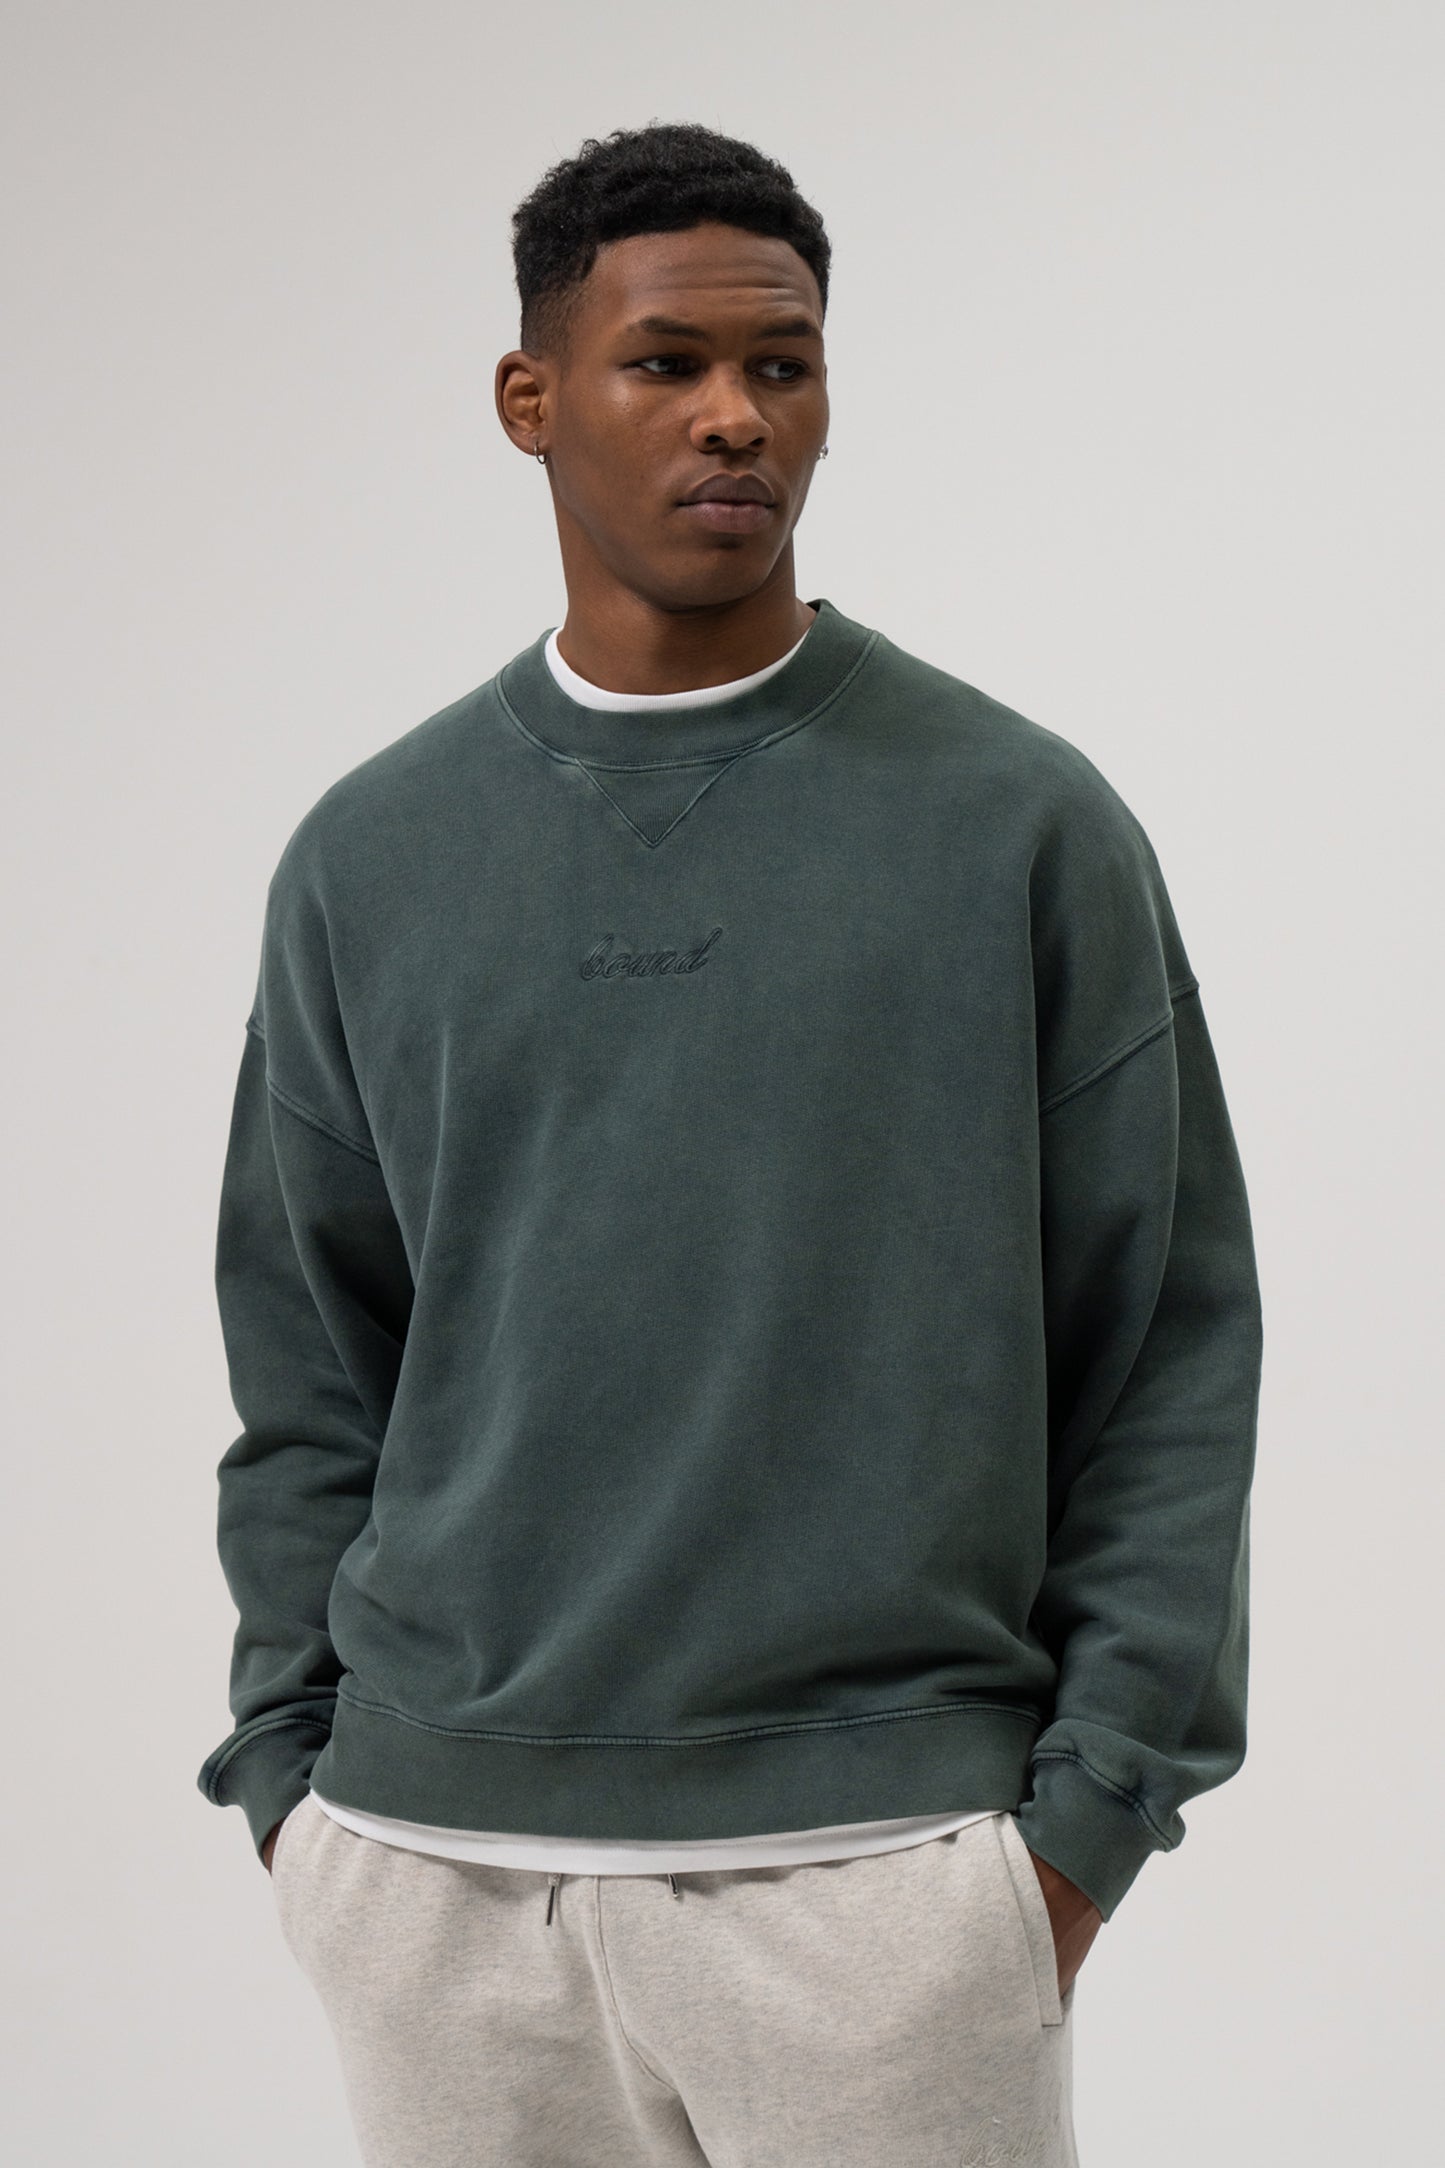 SUSTAIN WASHED GREEN SWEATER & JOGGERS SET